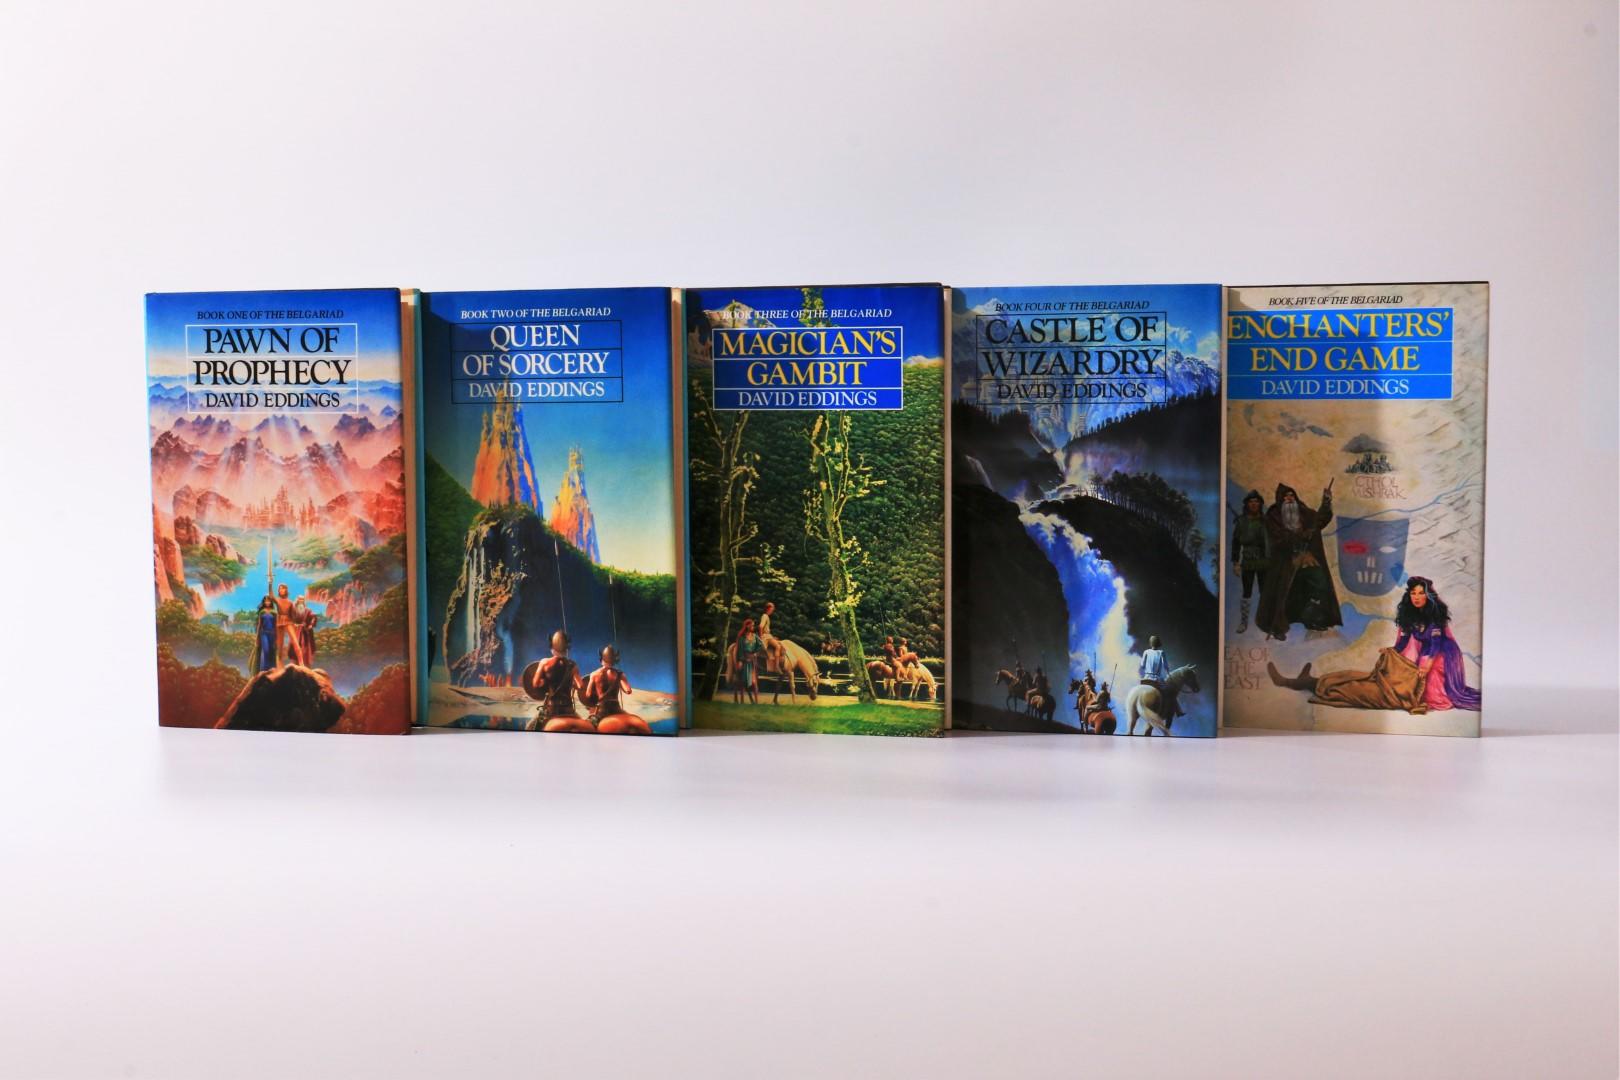 David Eddings - The Belgariad [comprising] Pawn of Prophecy, Queen of Sorcery, Magician's Gambit, Castle of Wizardry, and Enchanters' End Game - Century, 1982-1985, First Edition.